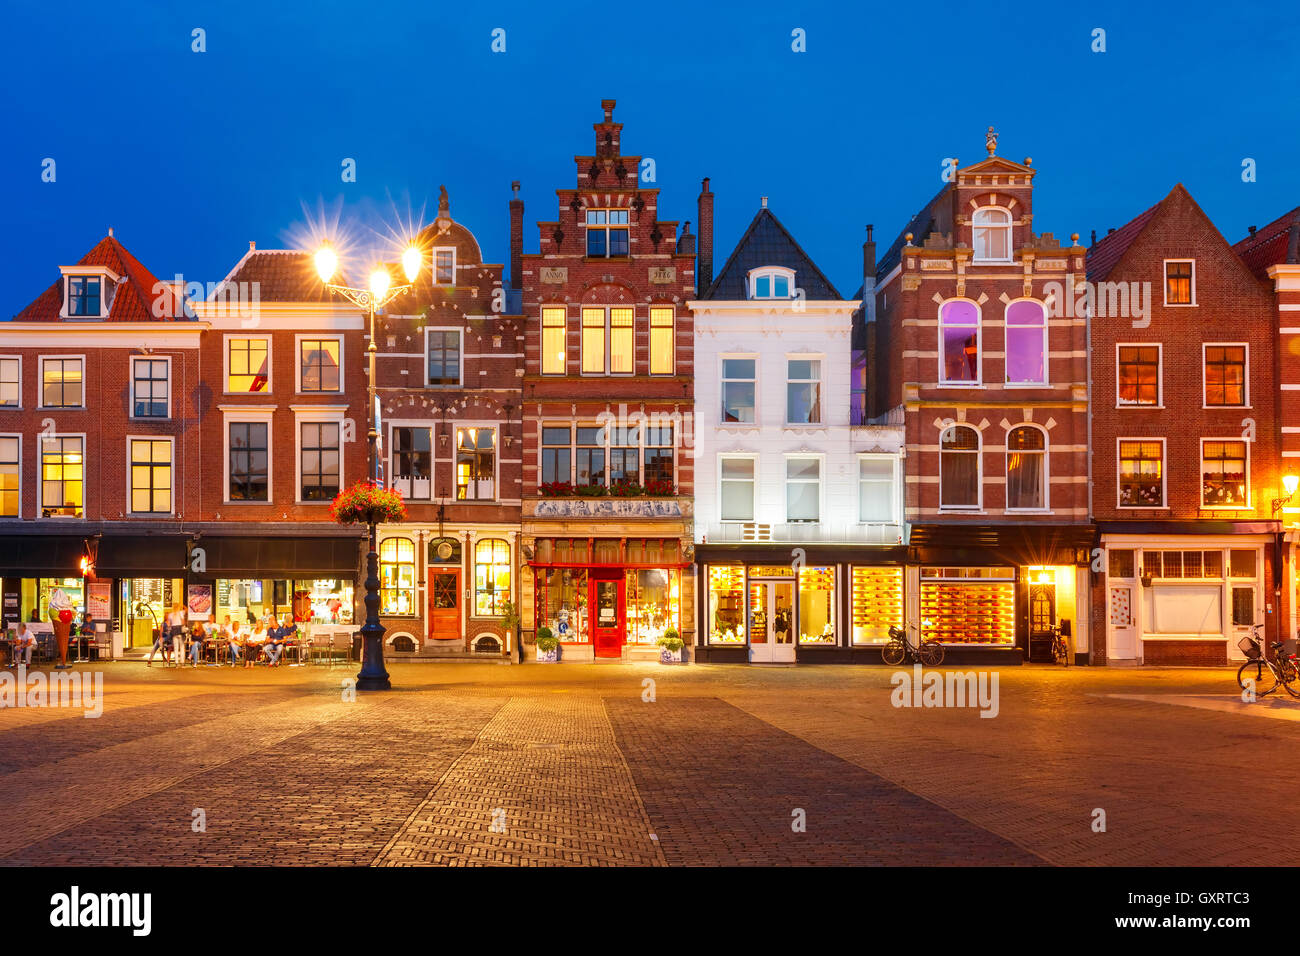 Markt square at night in Delft, Netherlands Stock Photo